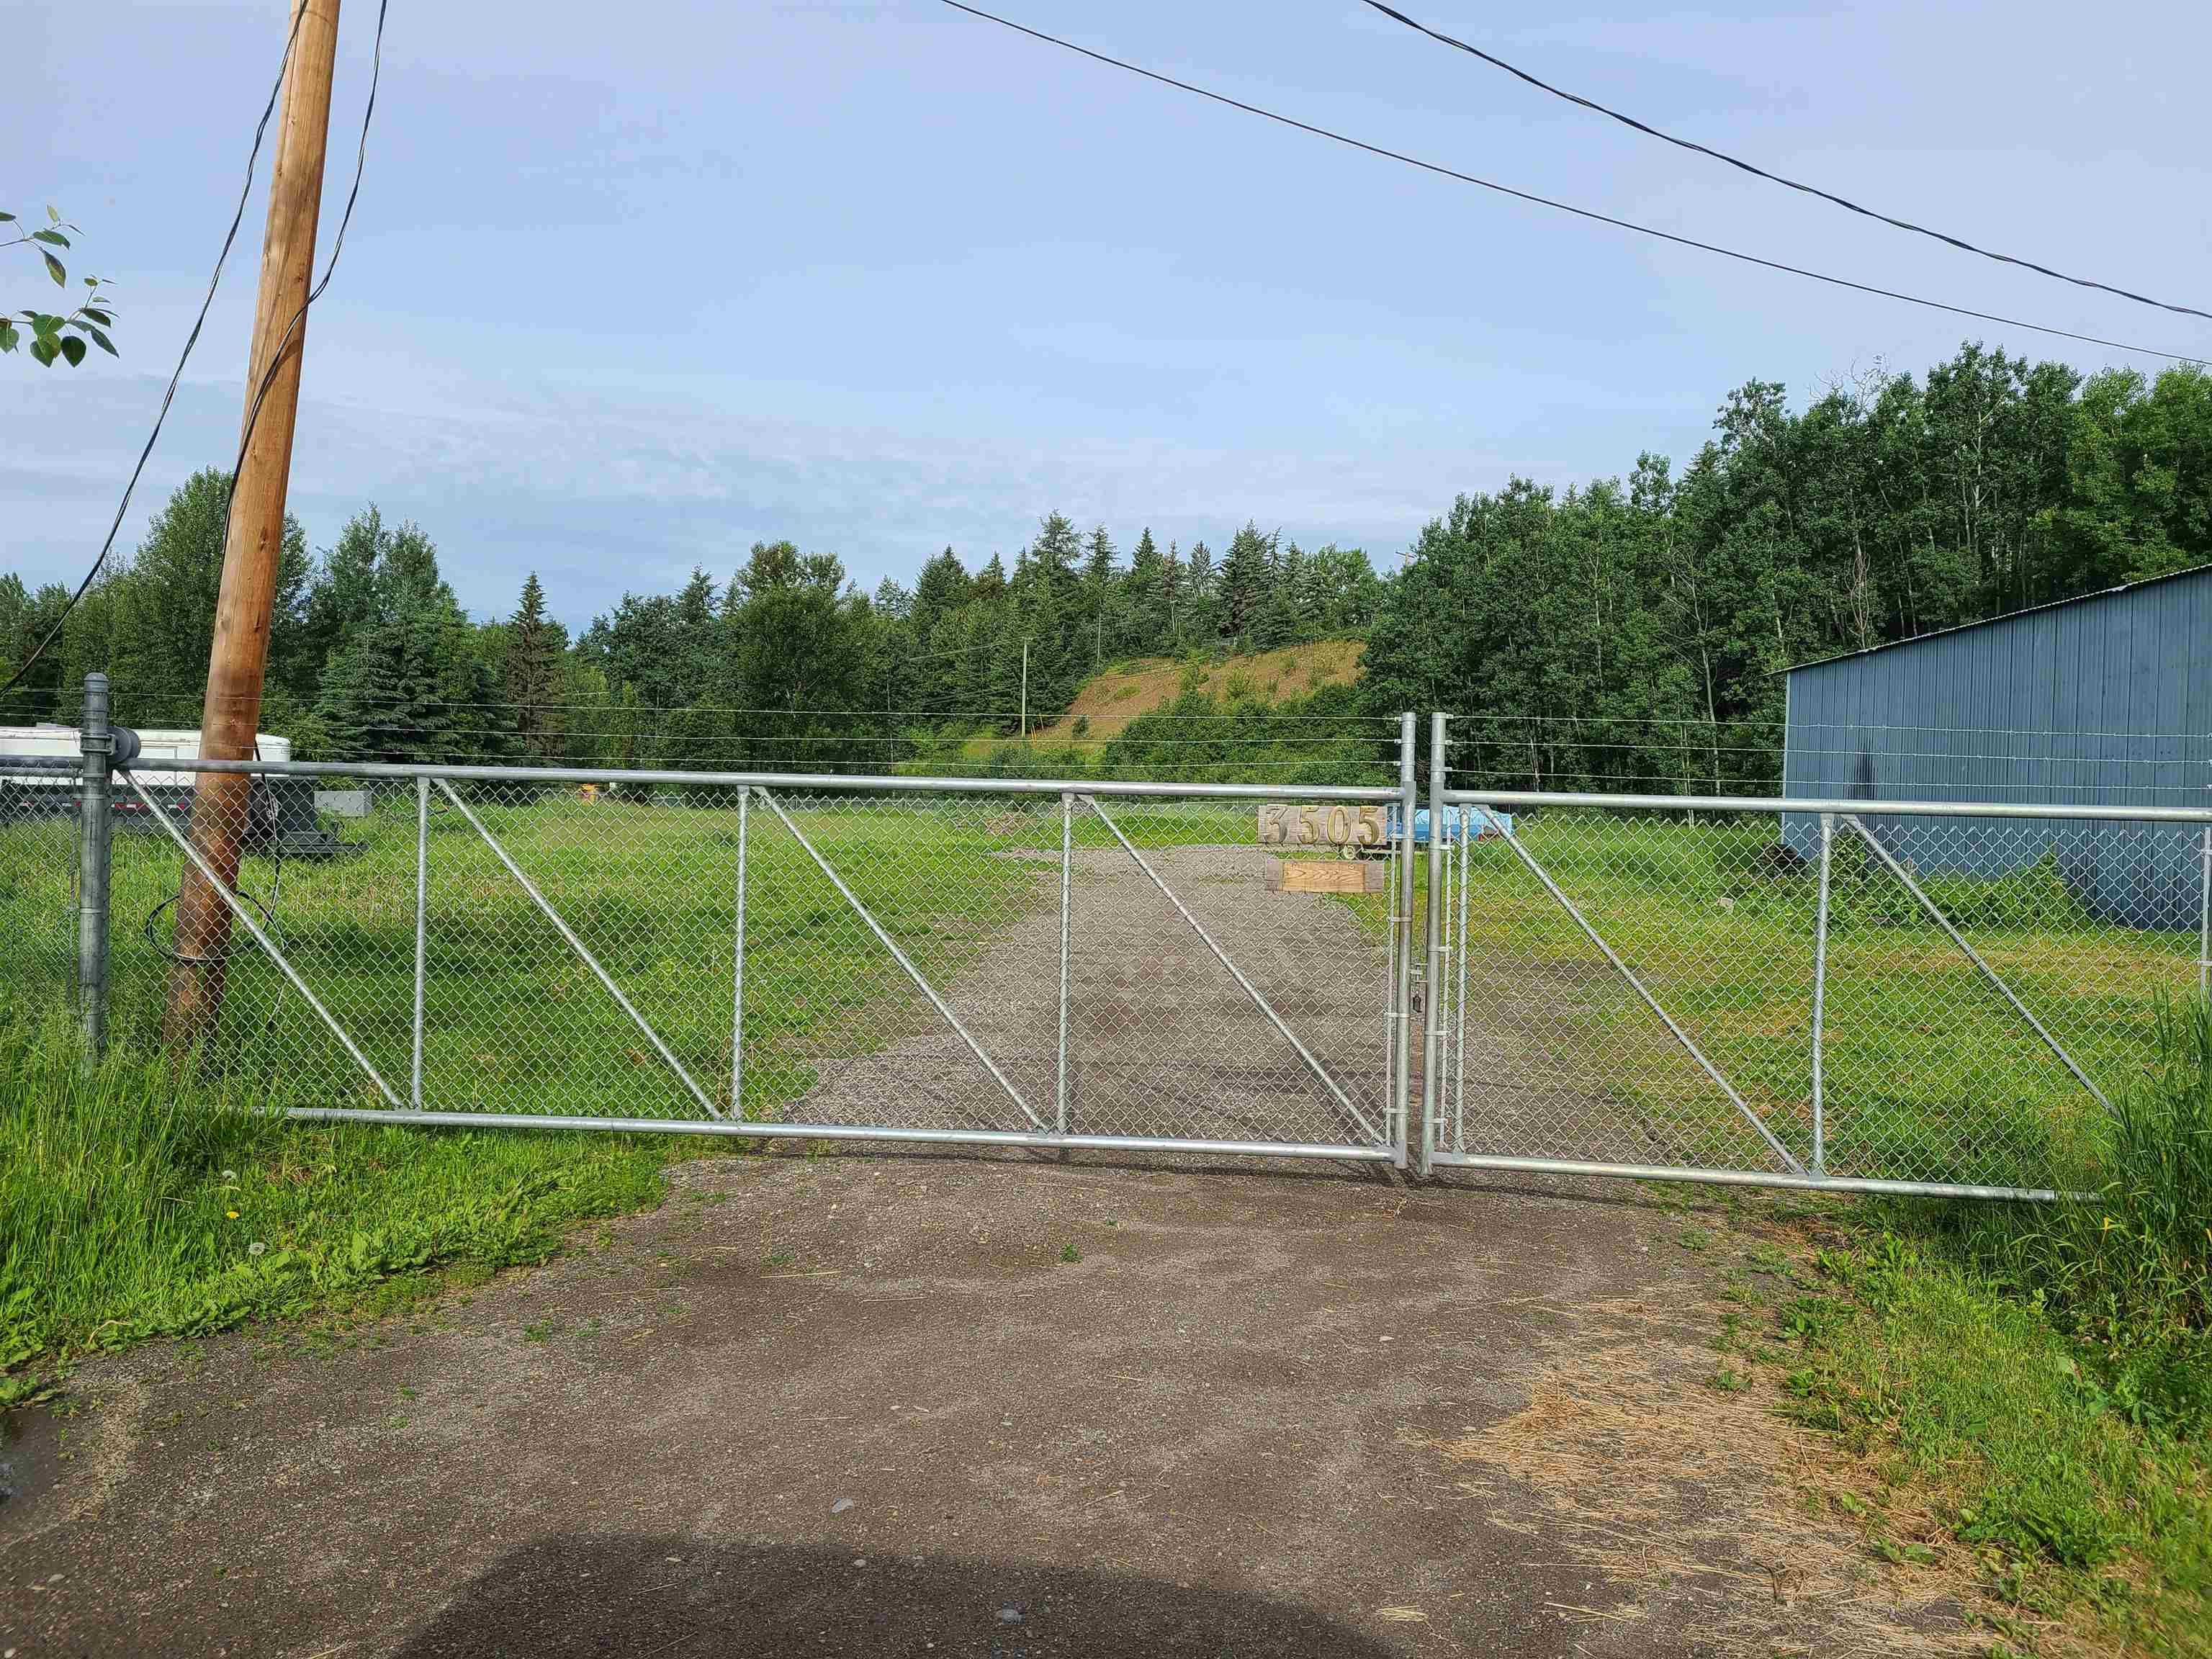 Main Photo: 3505 PIERREROY Road in Prince George: Fraserview Industrial for lease (PG City West)  : MLS®# C8049791